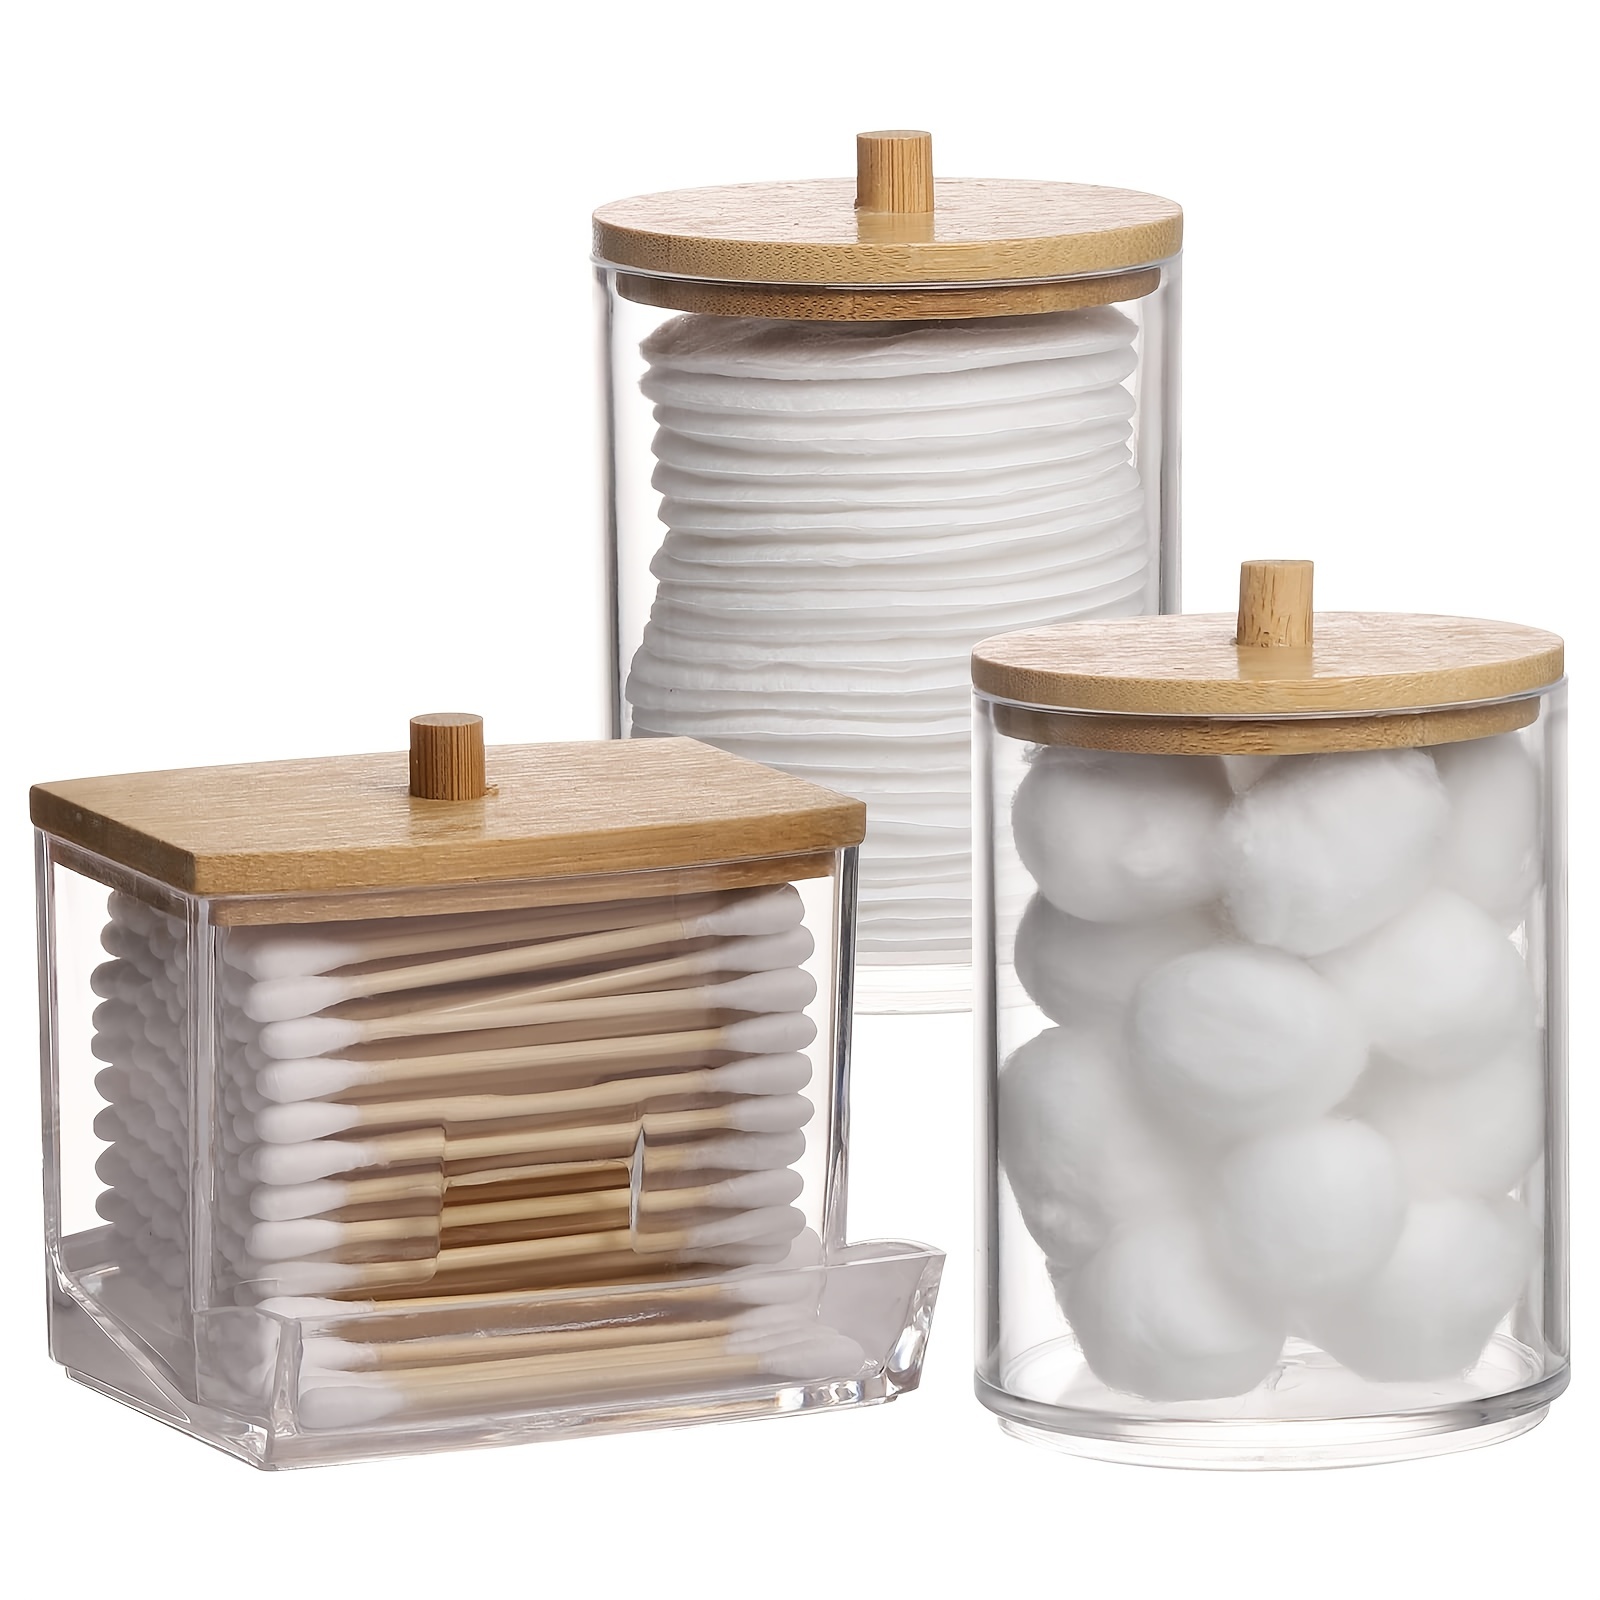 

1pc/3pcs Dispenser For Cotton Ball, Cotton Swab Cotton Round Pads Floss 7/10 Oz Clear Plastic Apothecary Jar Set, Bathroom Canister Storage Box, Vanity Makeup Organizer With Wood Lids